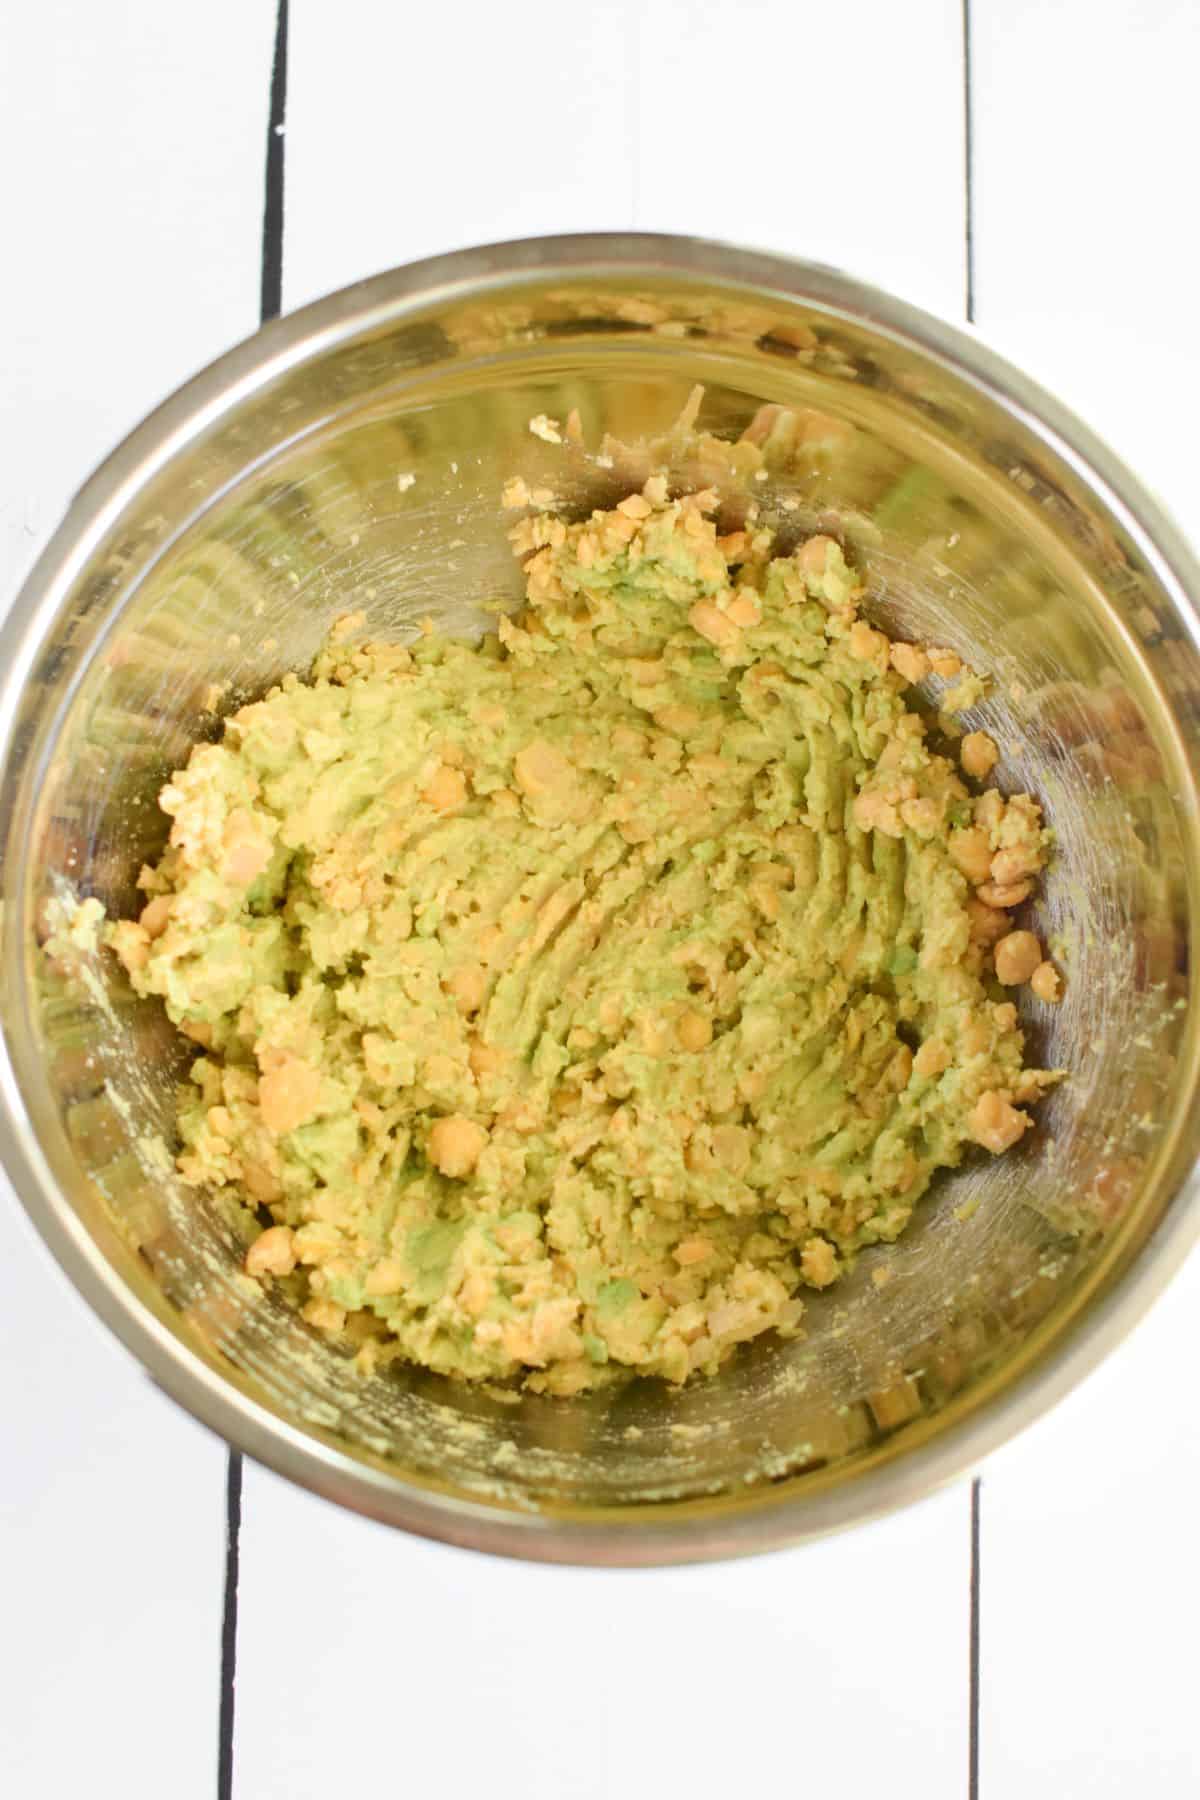 Smashed avocado mixed into chickpeas in a bowl.